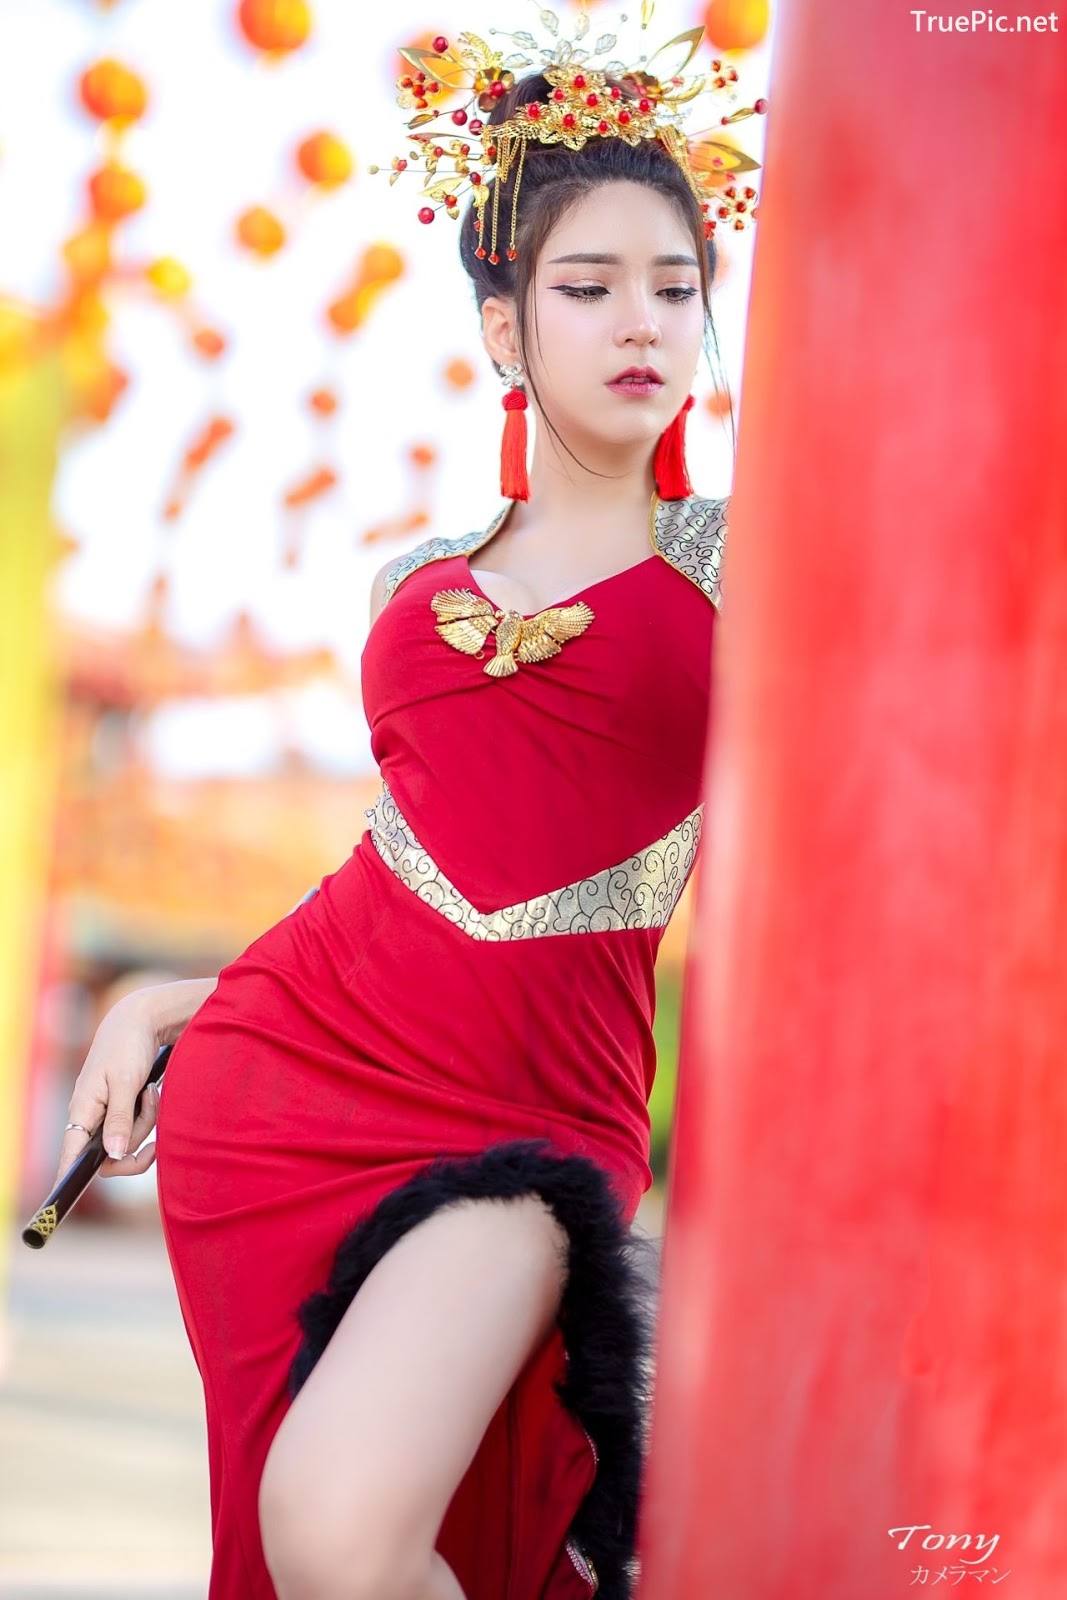 Image-Thailand-Hot-Model-Janet-Kanokwan-Saesim-Sexy-Chinese-Girl-Red-Dress-Traditional-TruePic.net- Picture-28